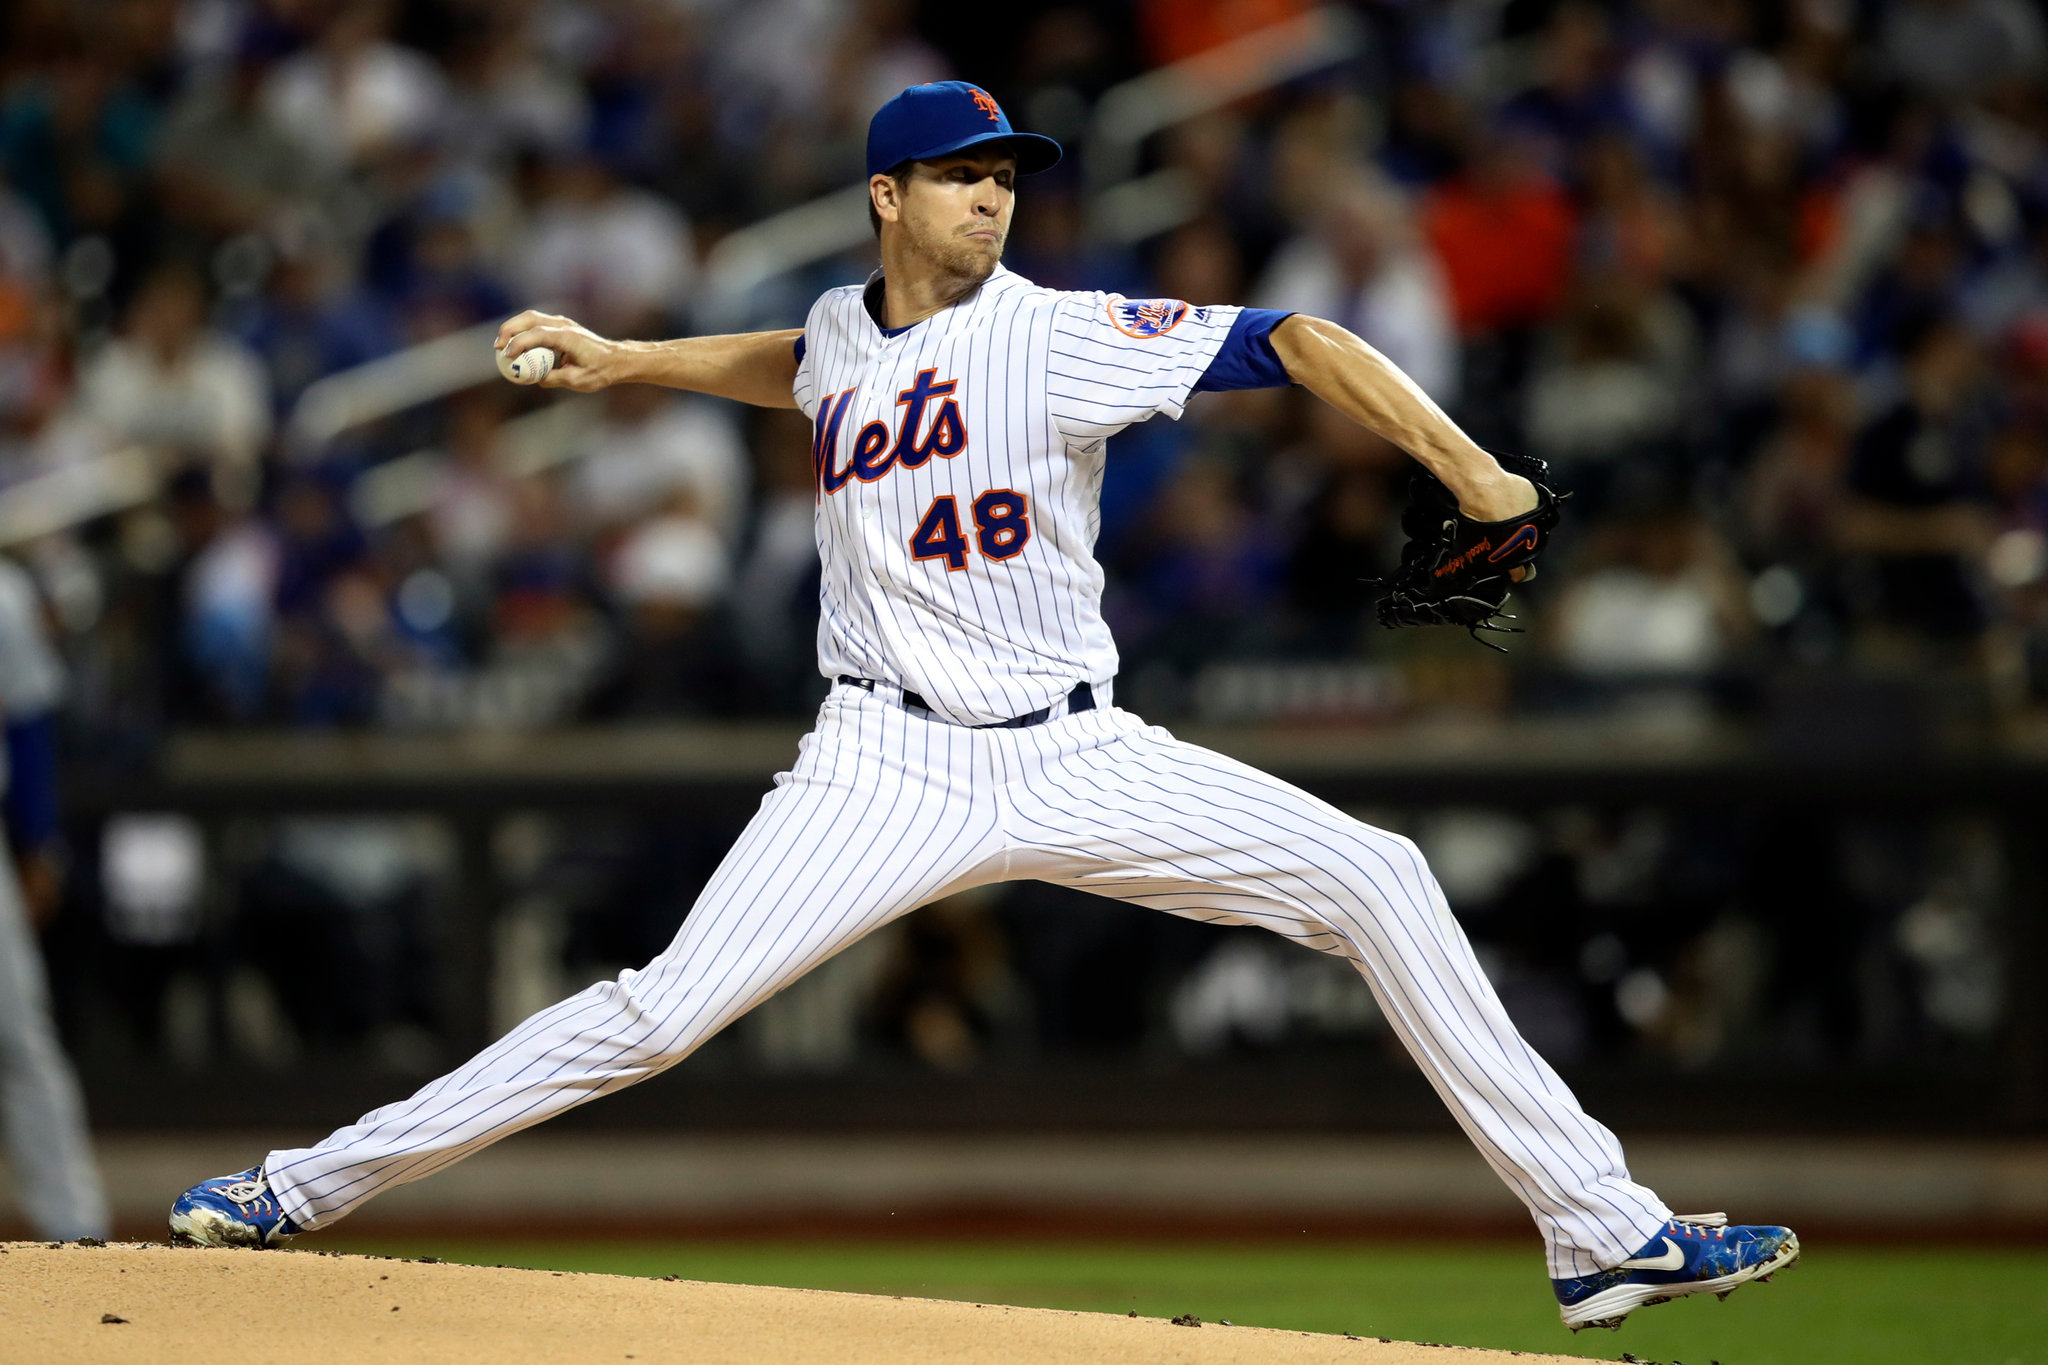 Jacob deGrom says his shorter hair will increase his fastball velocity